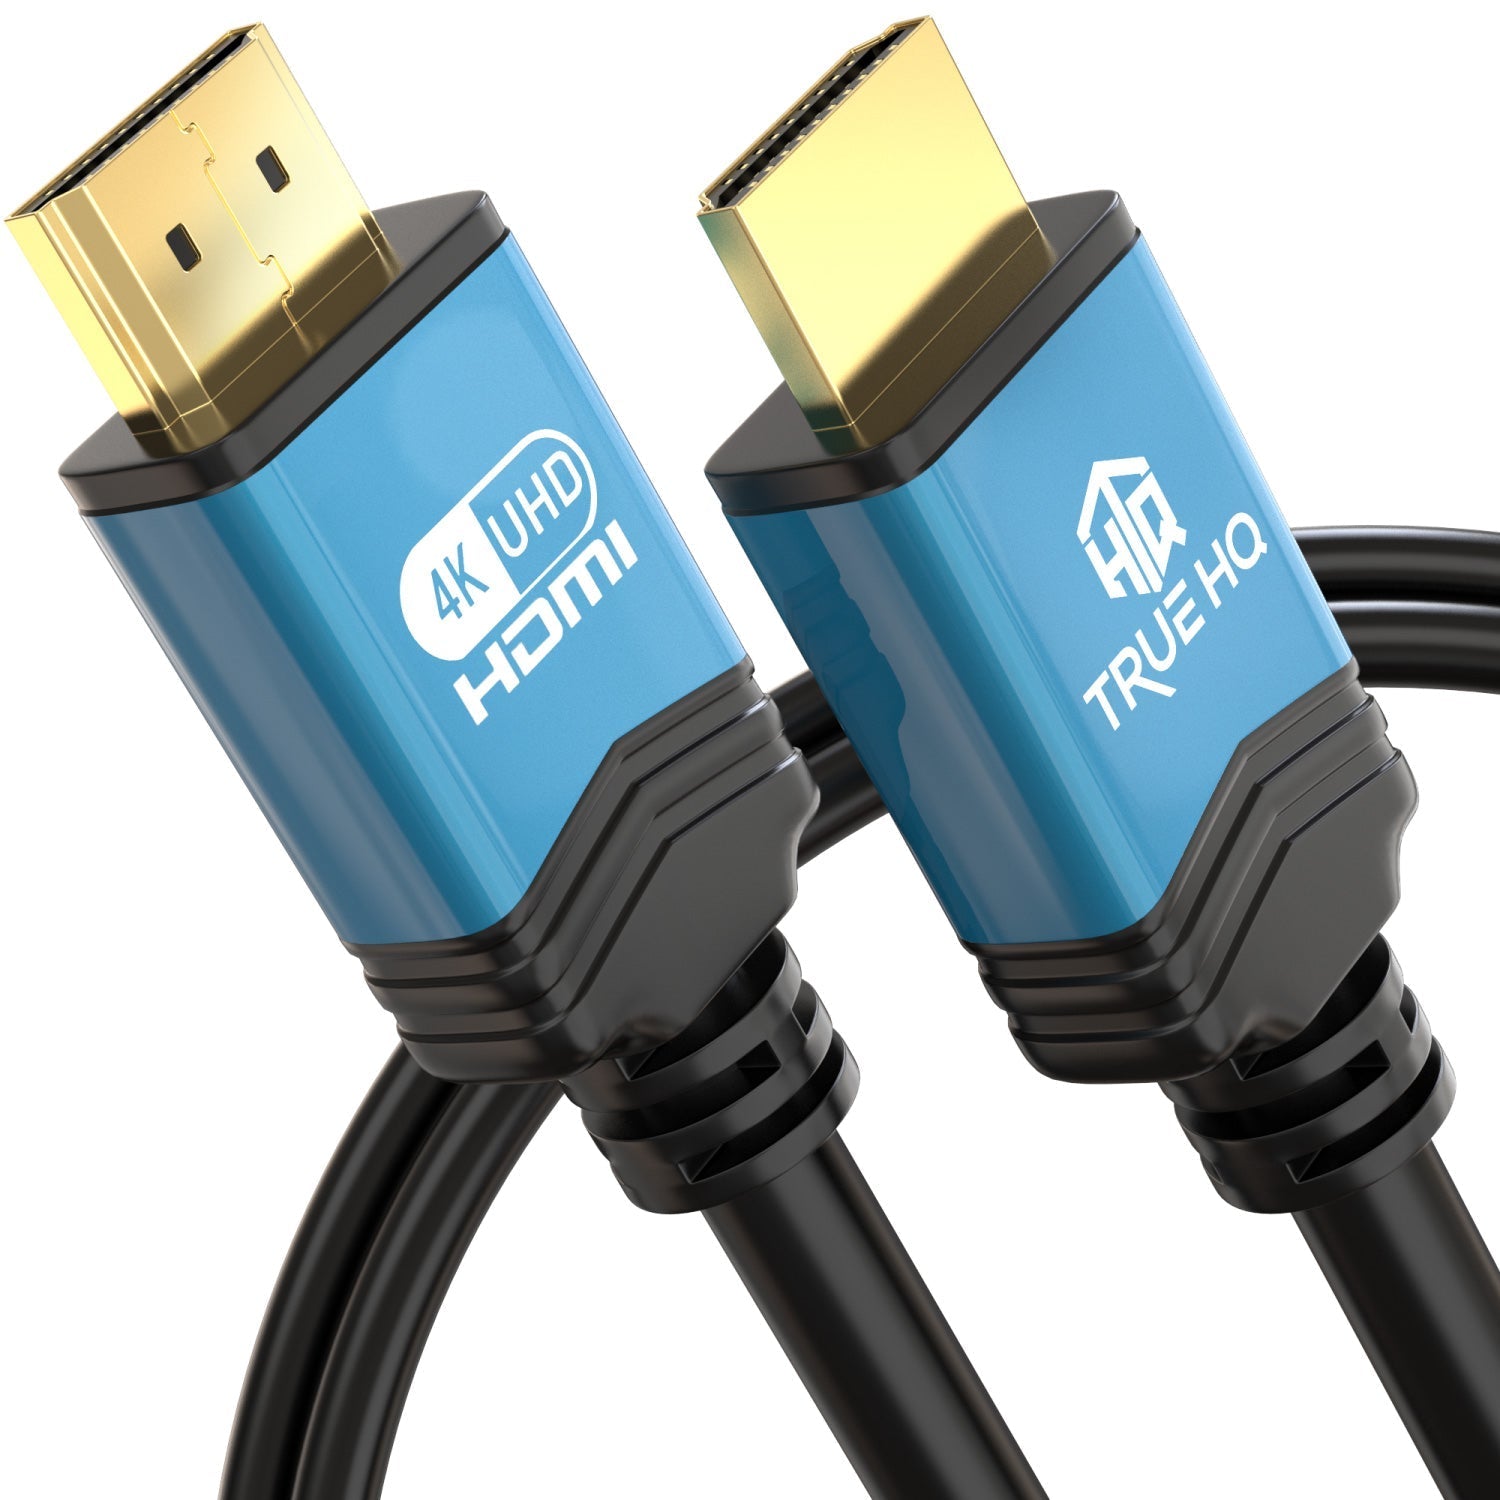 4K HDMI CABLE 20M HDMI LEAD BY TRUE HQ | DESIGNED IN THE UK | ULTRA HIGH SPEED 18GBPS HDMI 2.0 CORD WITH ETHERNET